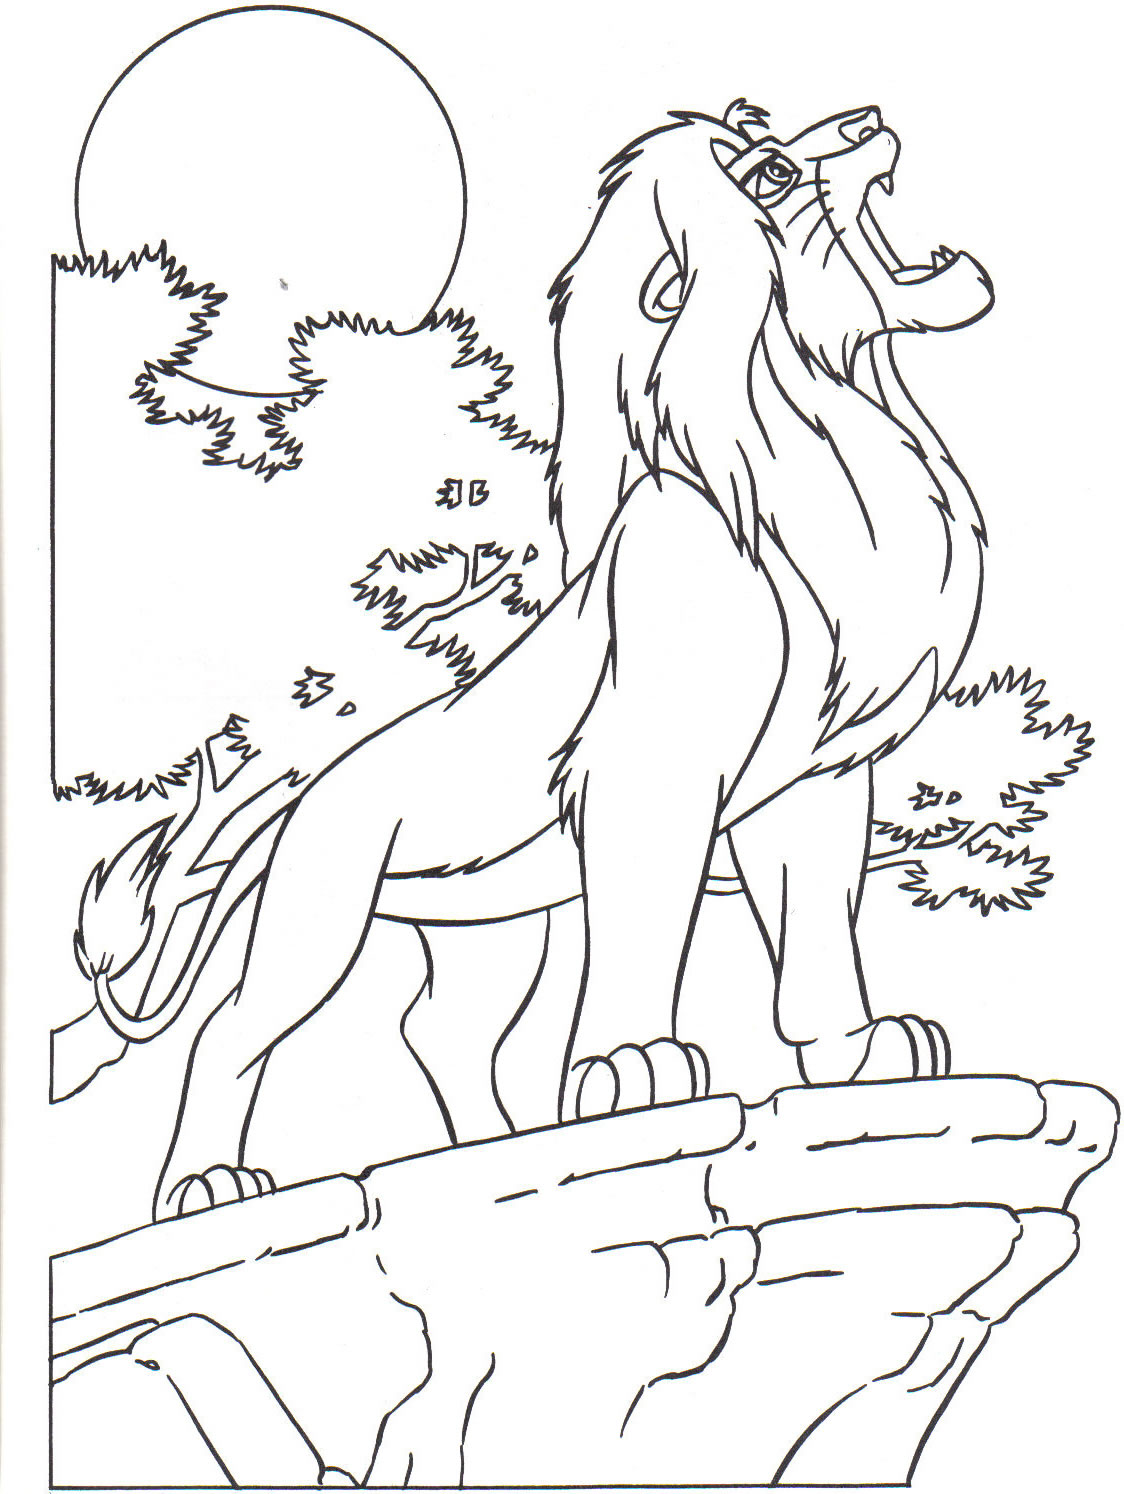 King Pose coloring page | Download Free King Pose coloring page for kids | King  drawing, Coloring pages, Abc coloring pages